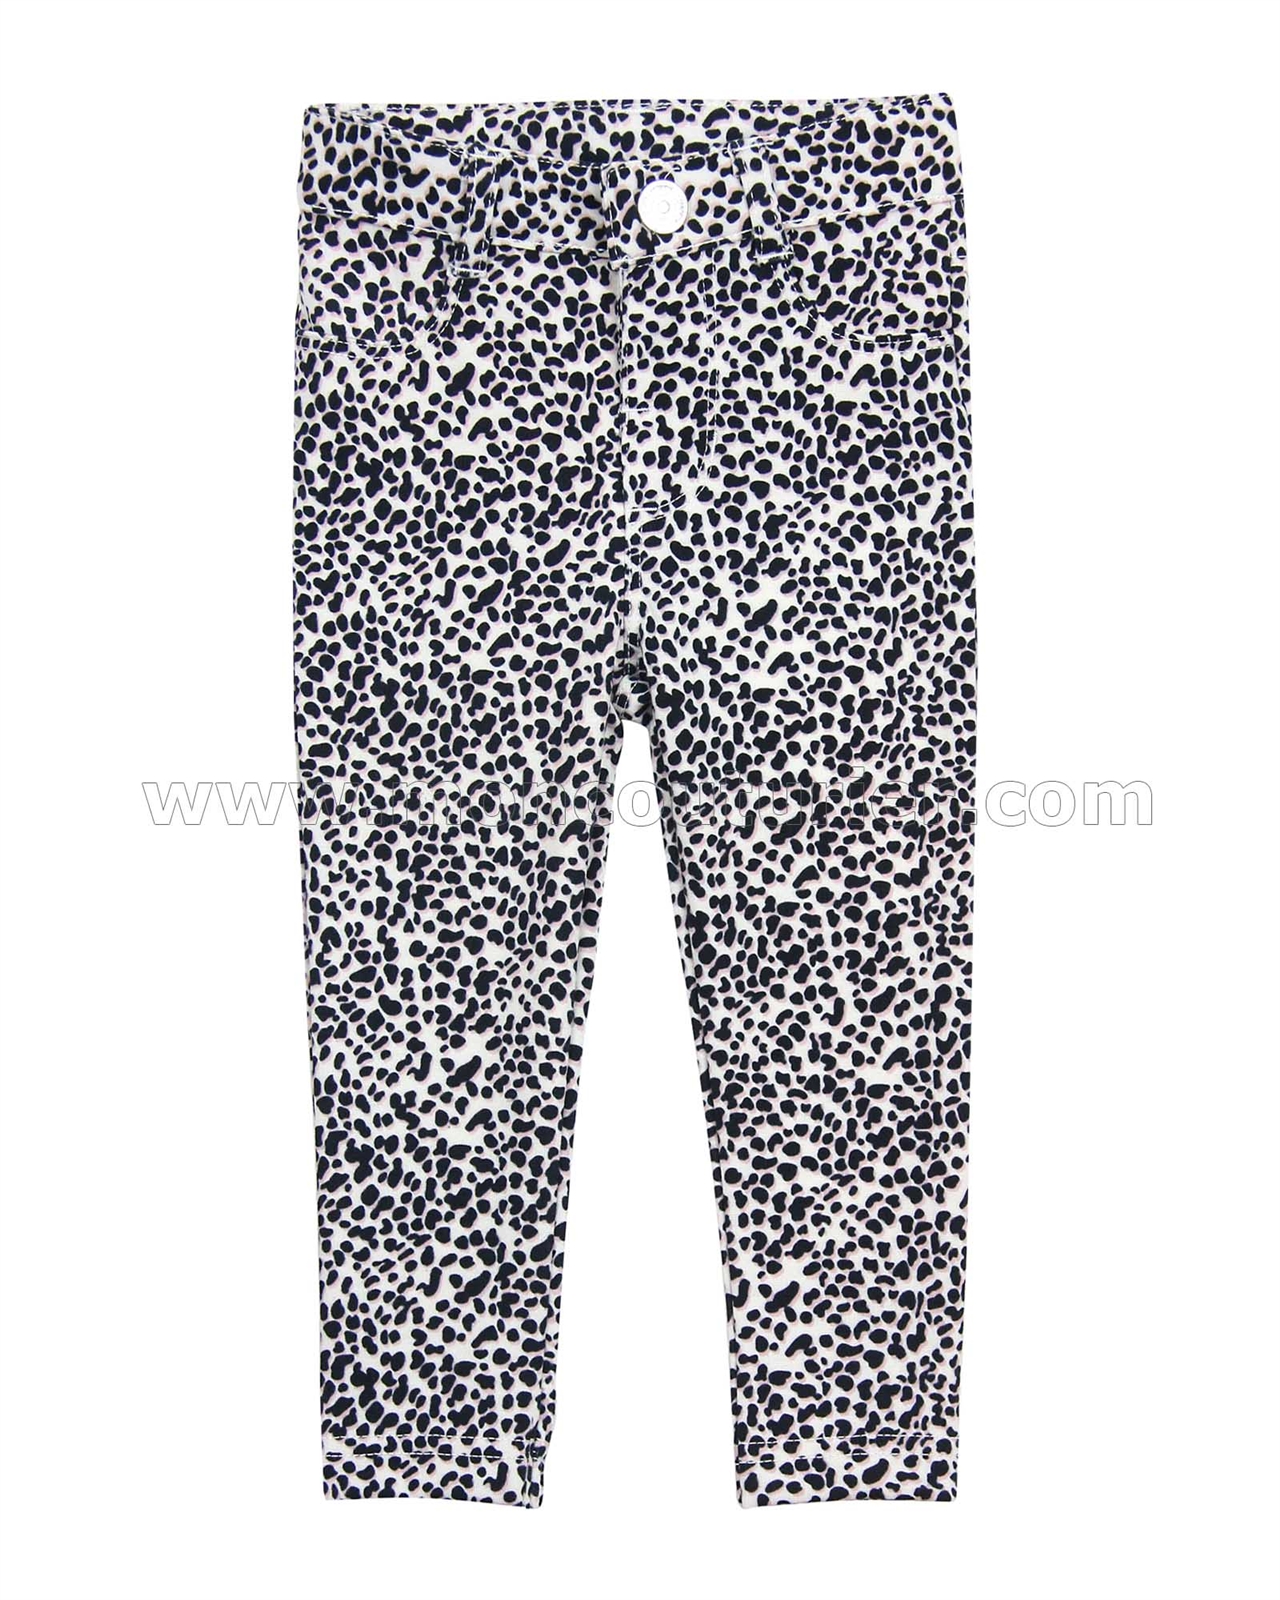 emmer Geroosterd Boost Le Chic Cheetah Print Pants - Le Chic - Le Chic Fall/Winter 2015/2016